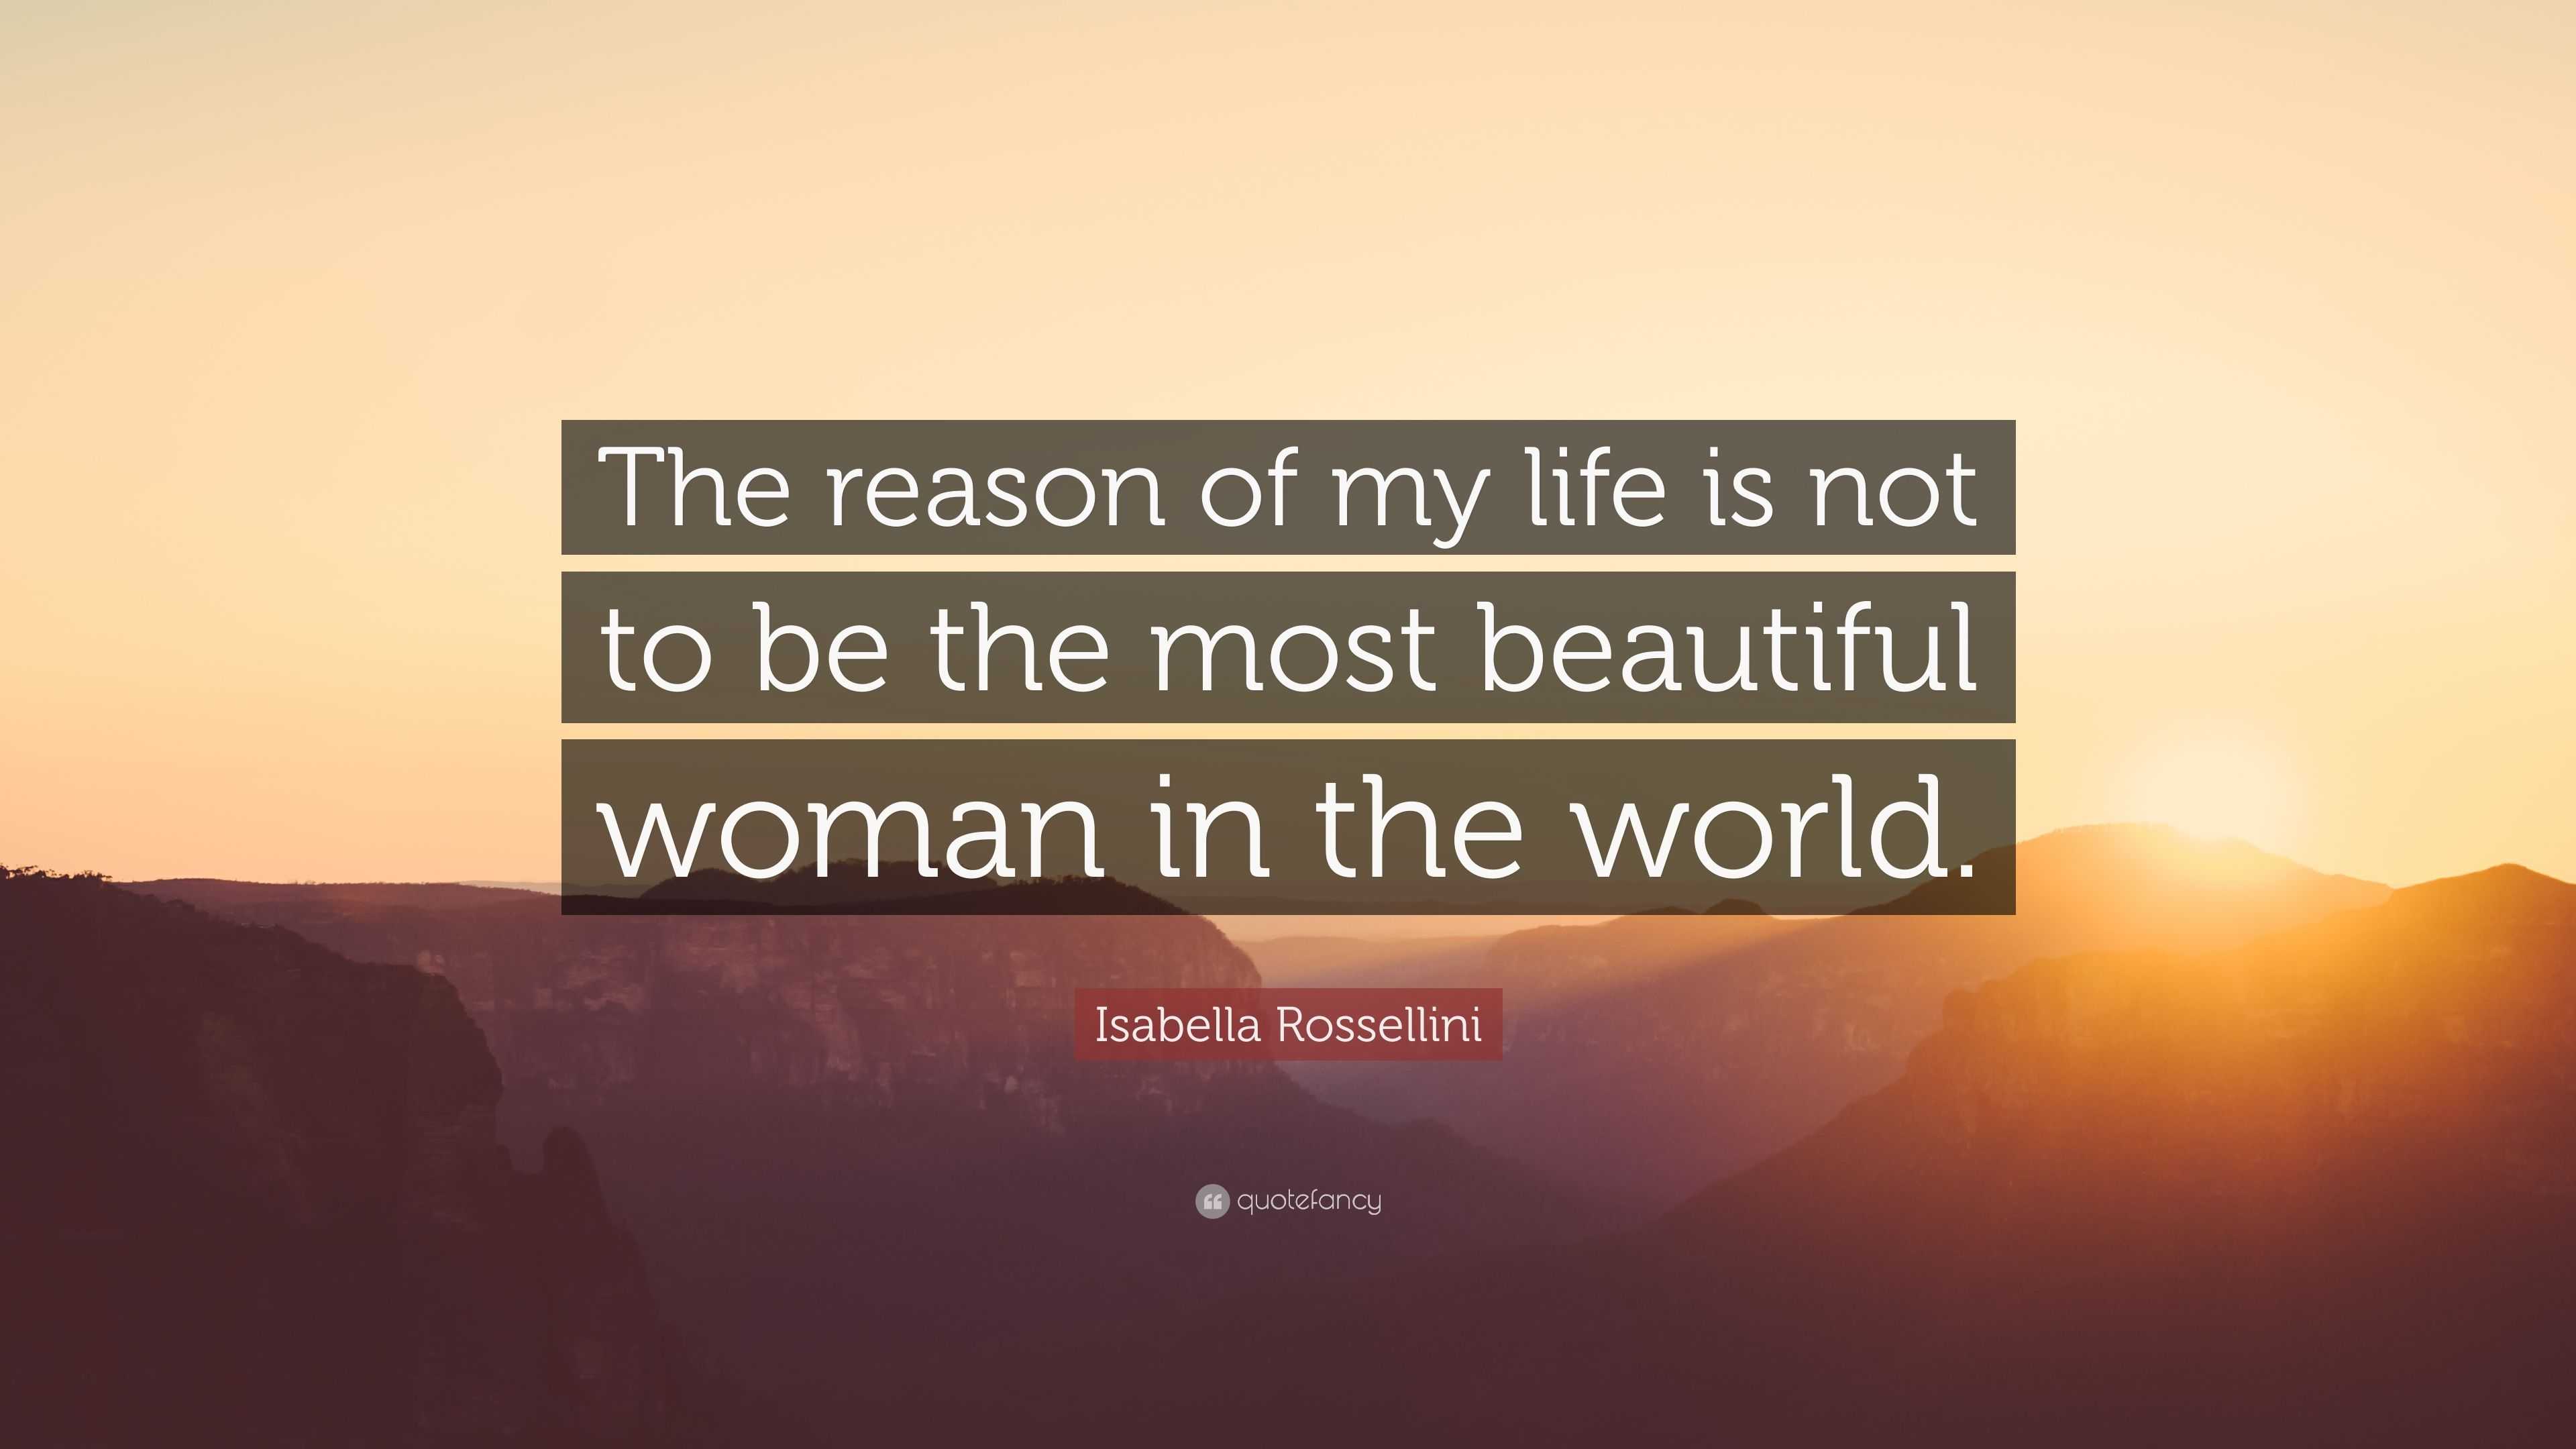 Isabella Rossellini Quote “The reason of my life is not